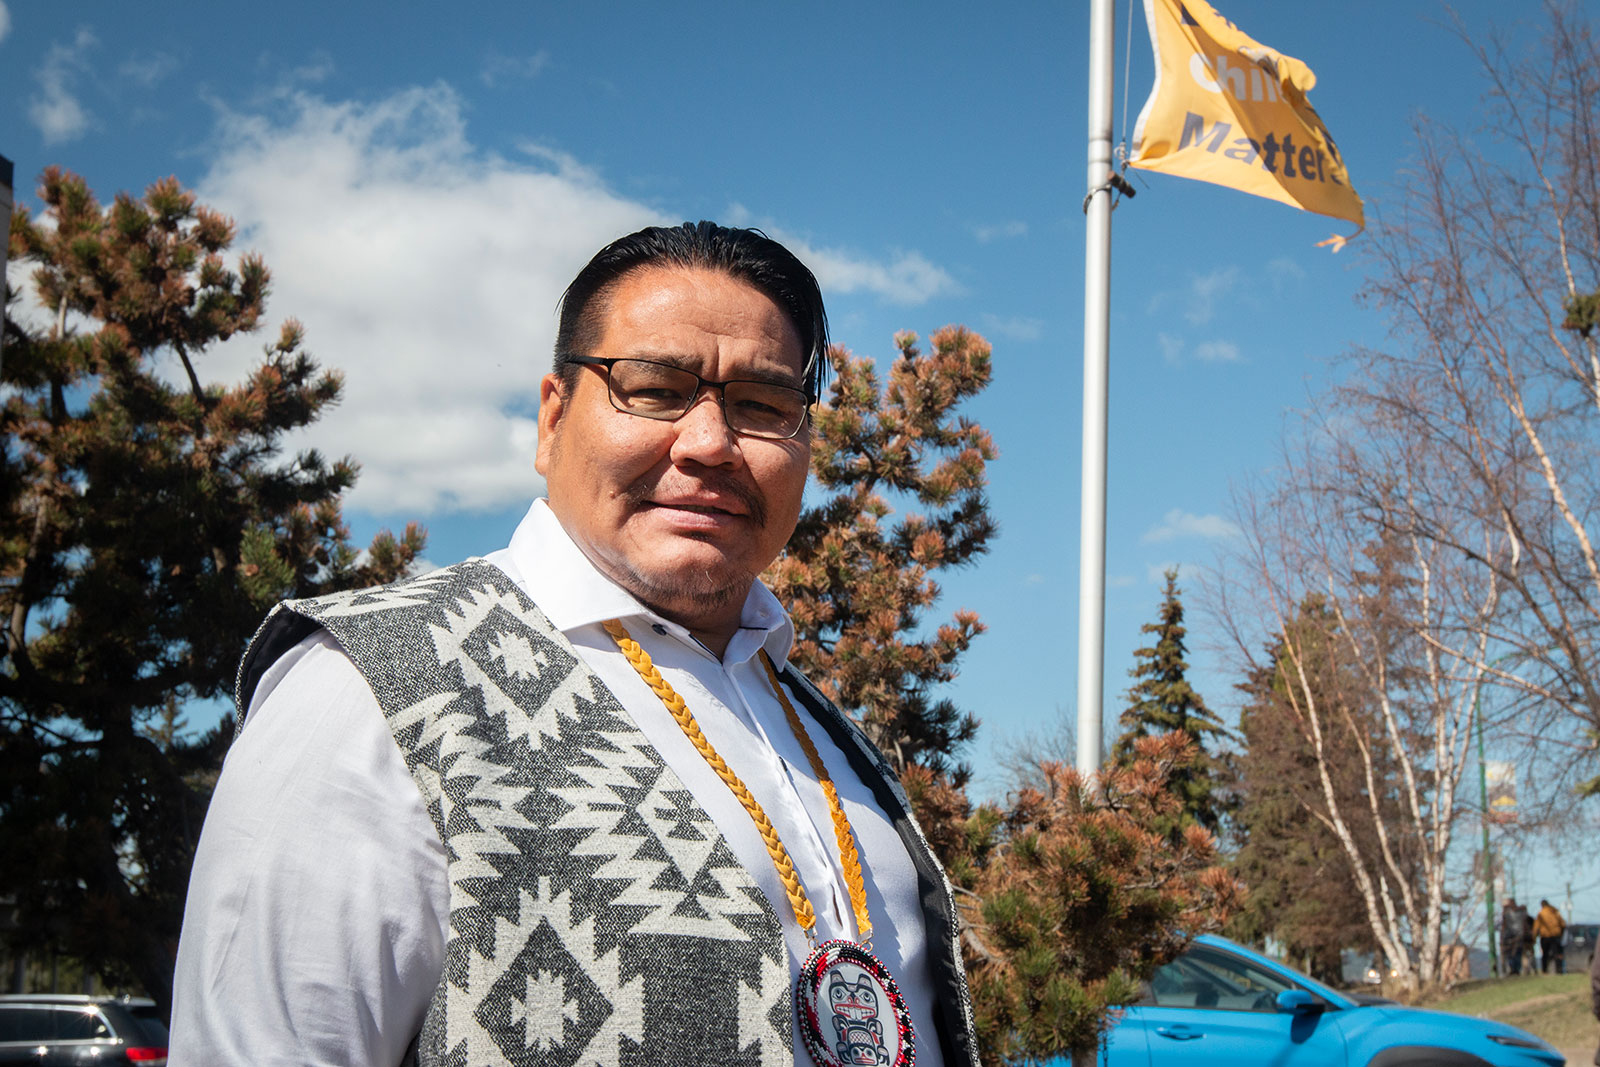 A man with dark hair and glasses stands below an orange flag and blue sky. He is wearing a vest with traditional Indigenous designs and a beaded pendant.